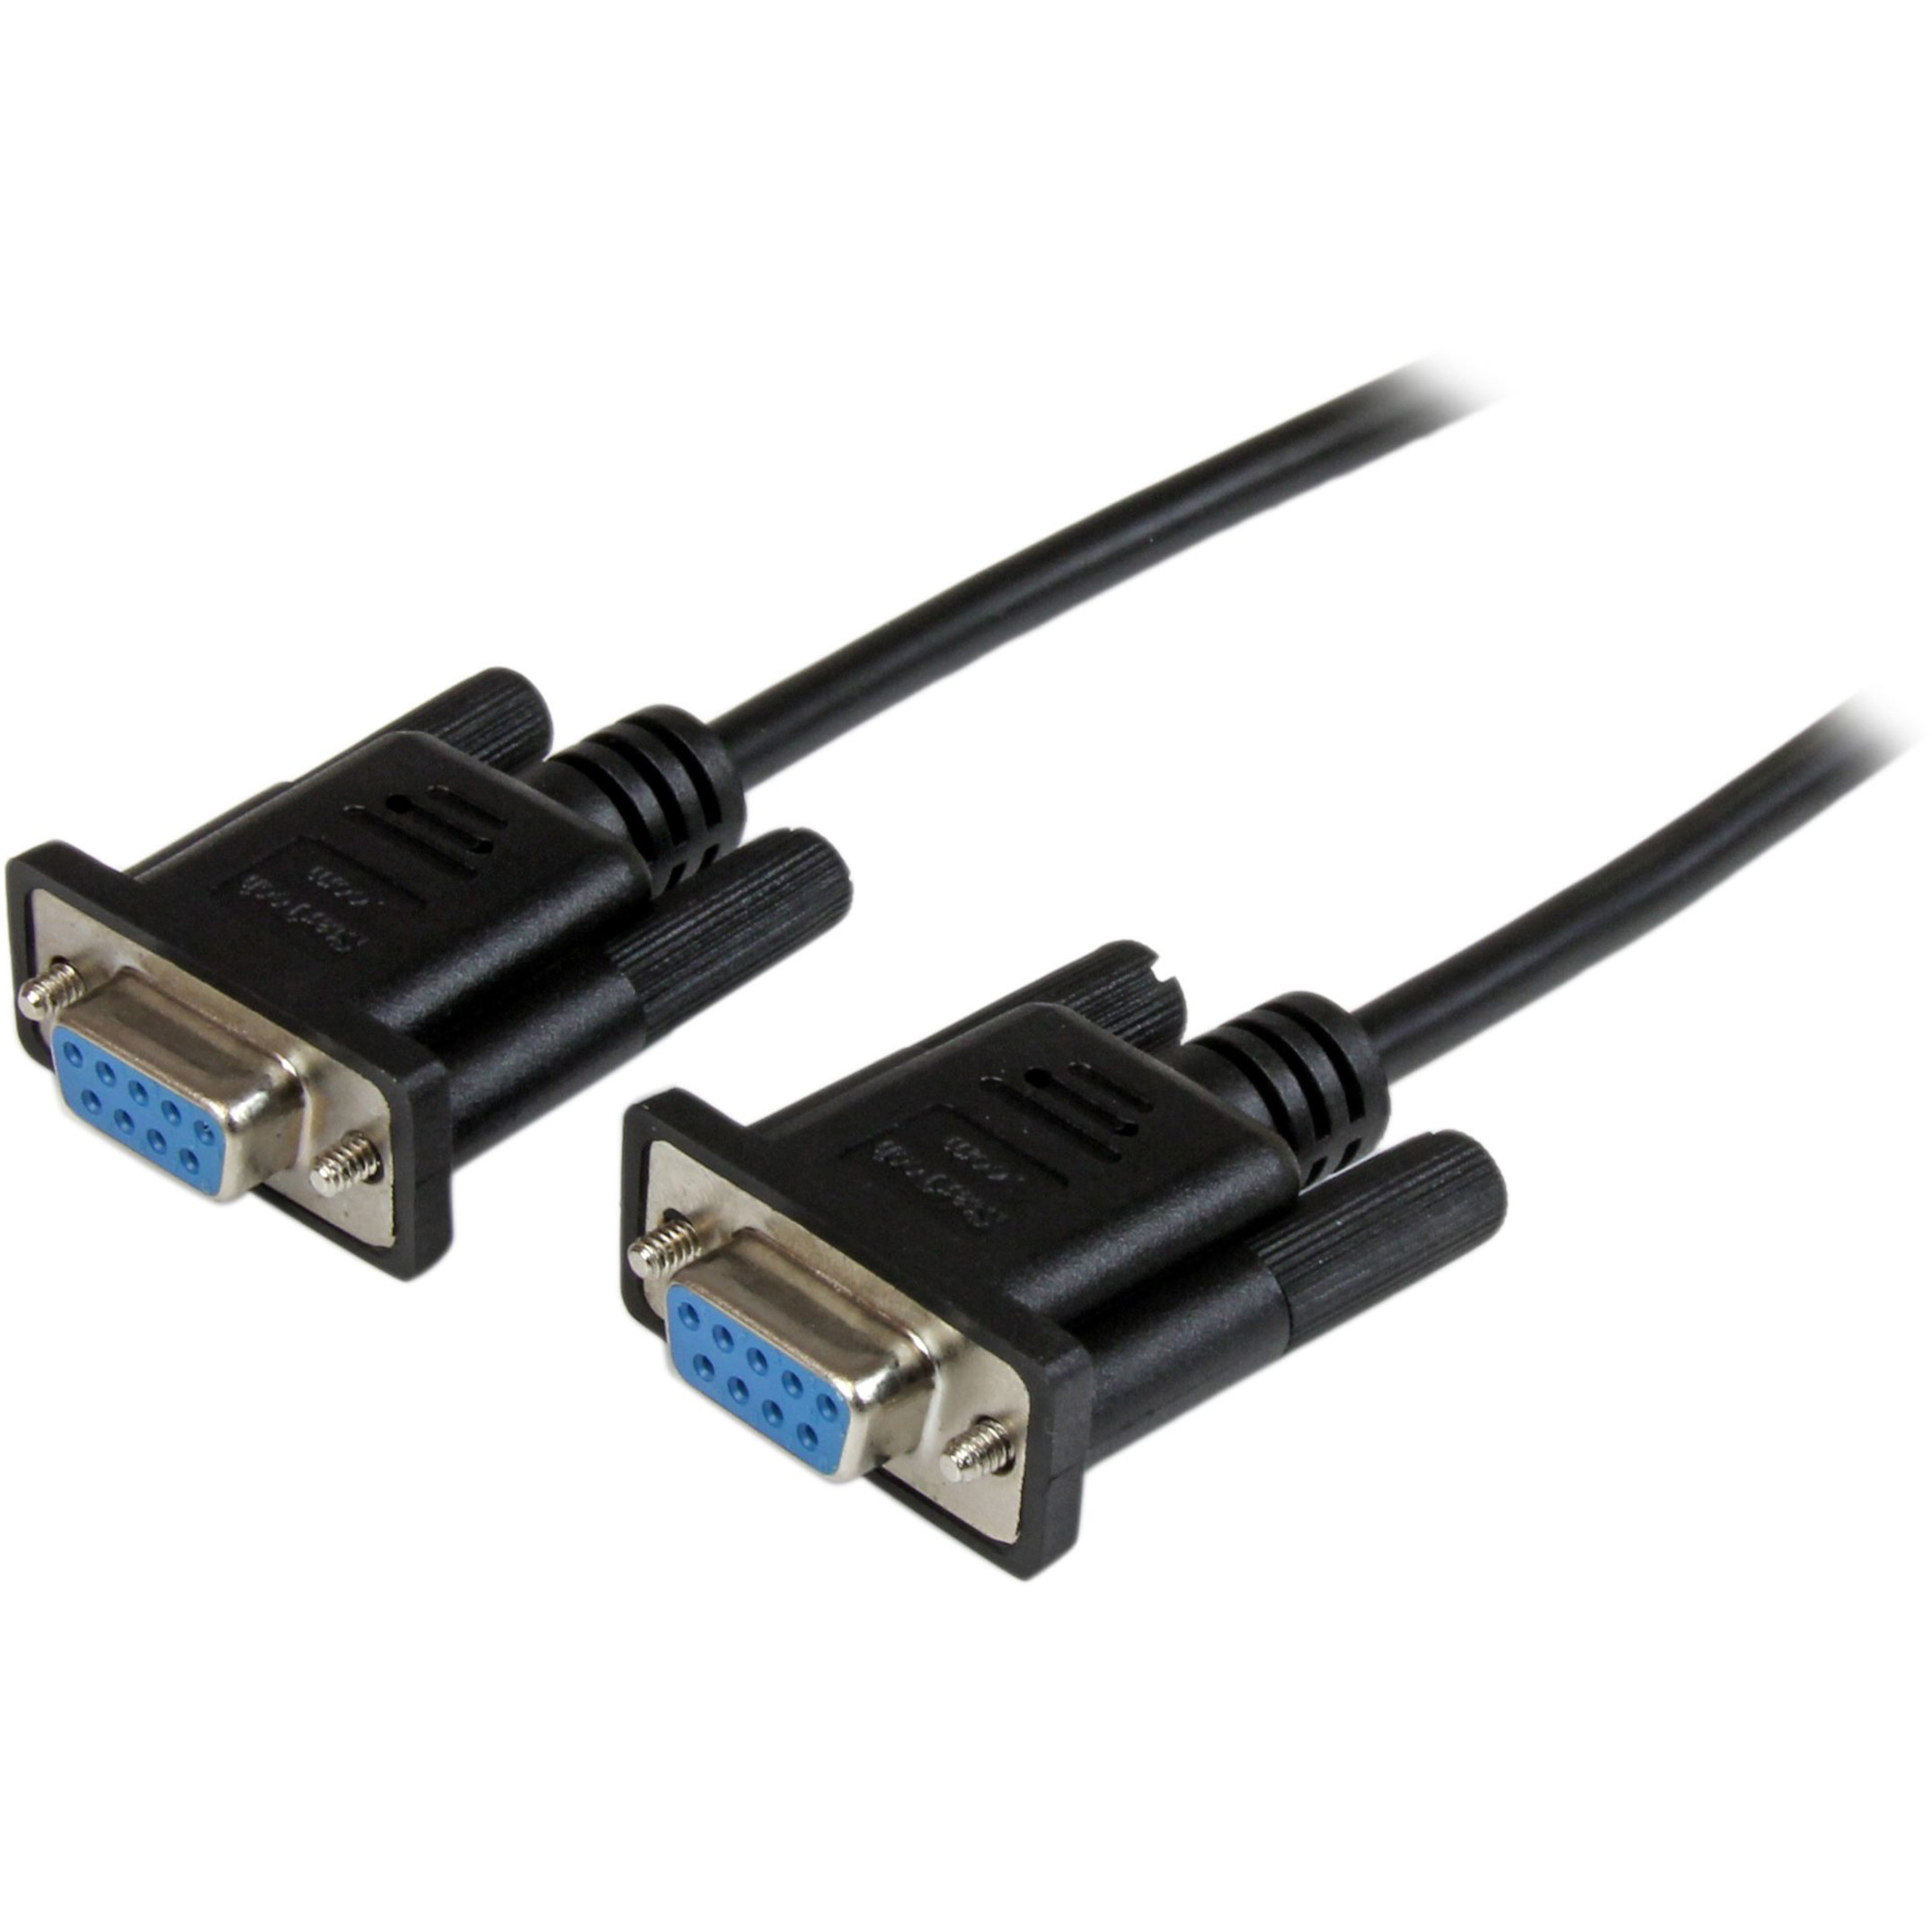 Startech .com 2m Black DB9 RS232 Serial Null Modem Cable F/FConnect your serial devices, and transfer your files2m DB9 Null Modem Cable… SCNM9FF2MBK